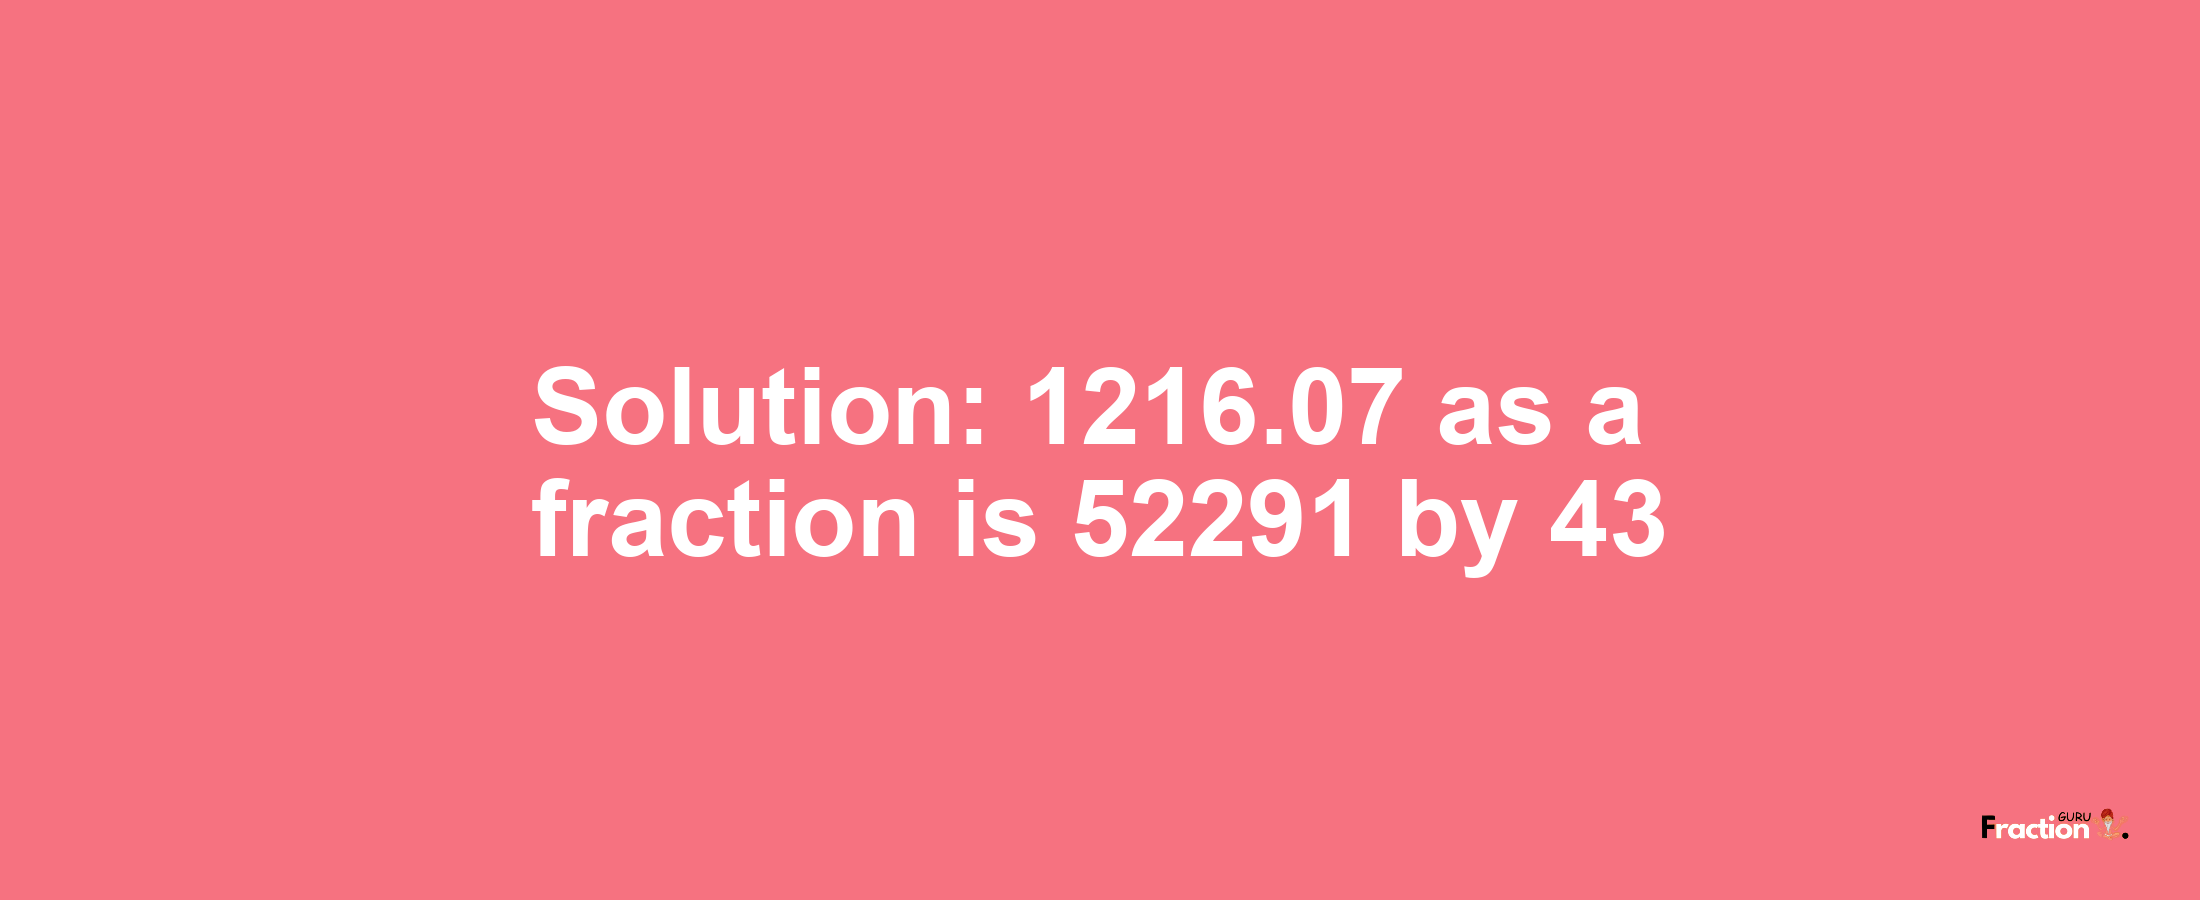 Solution:1216.07 as a fraction is 52291/43